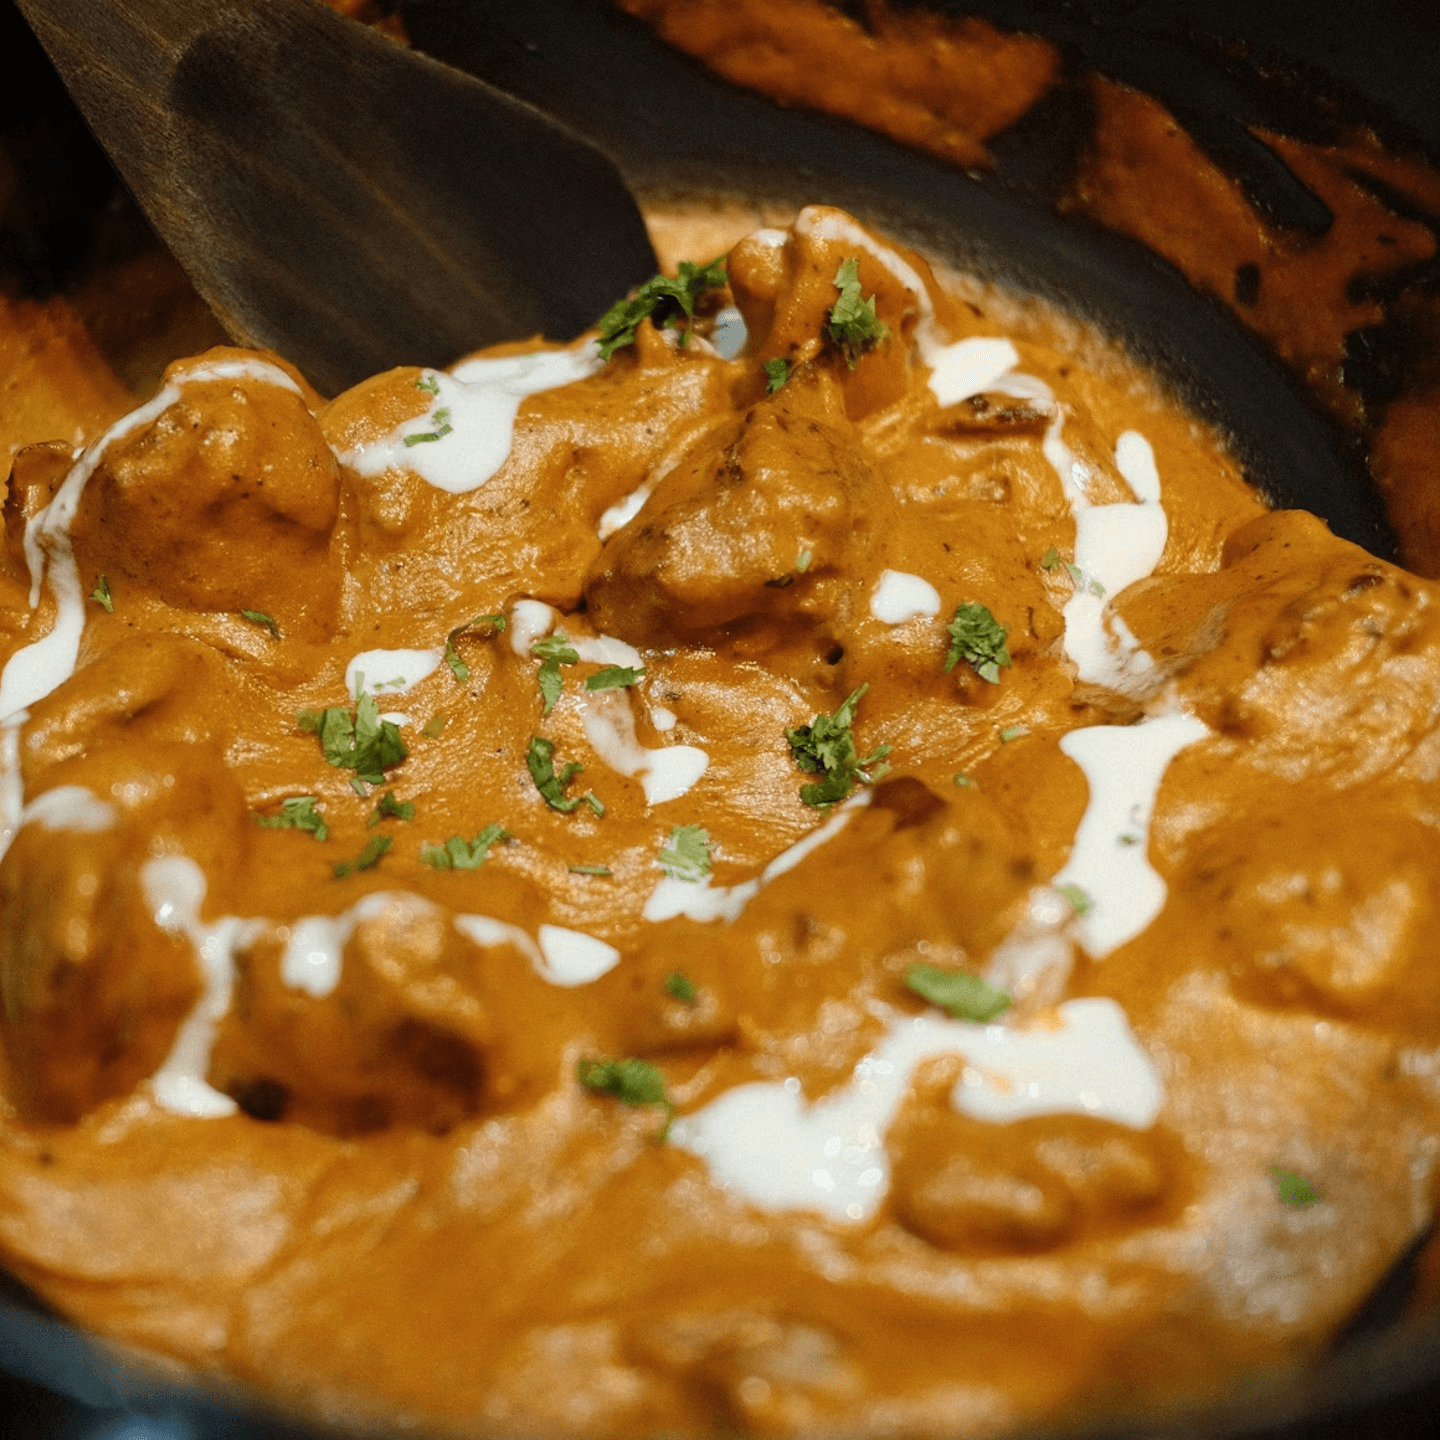  Our Authentic Indian Butter Chicken! 🍗